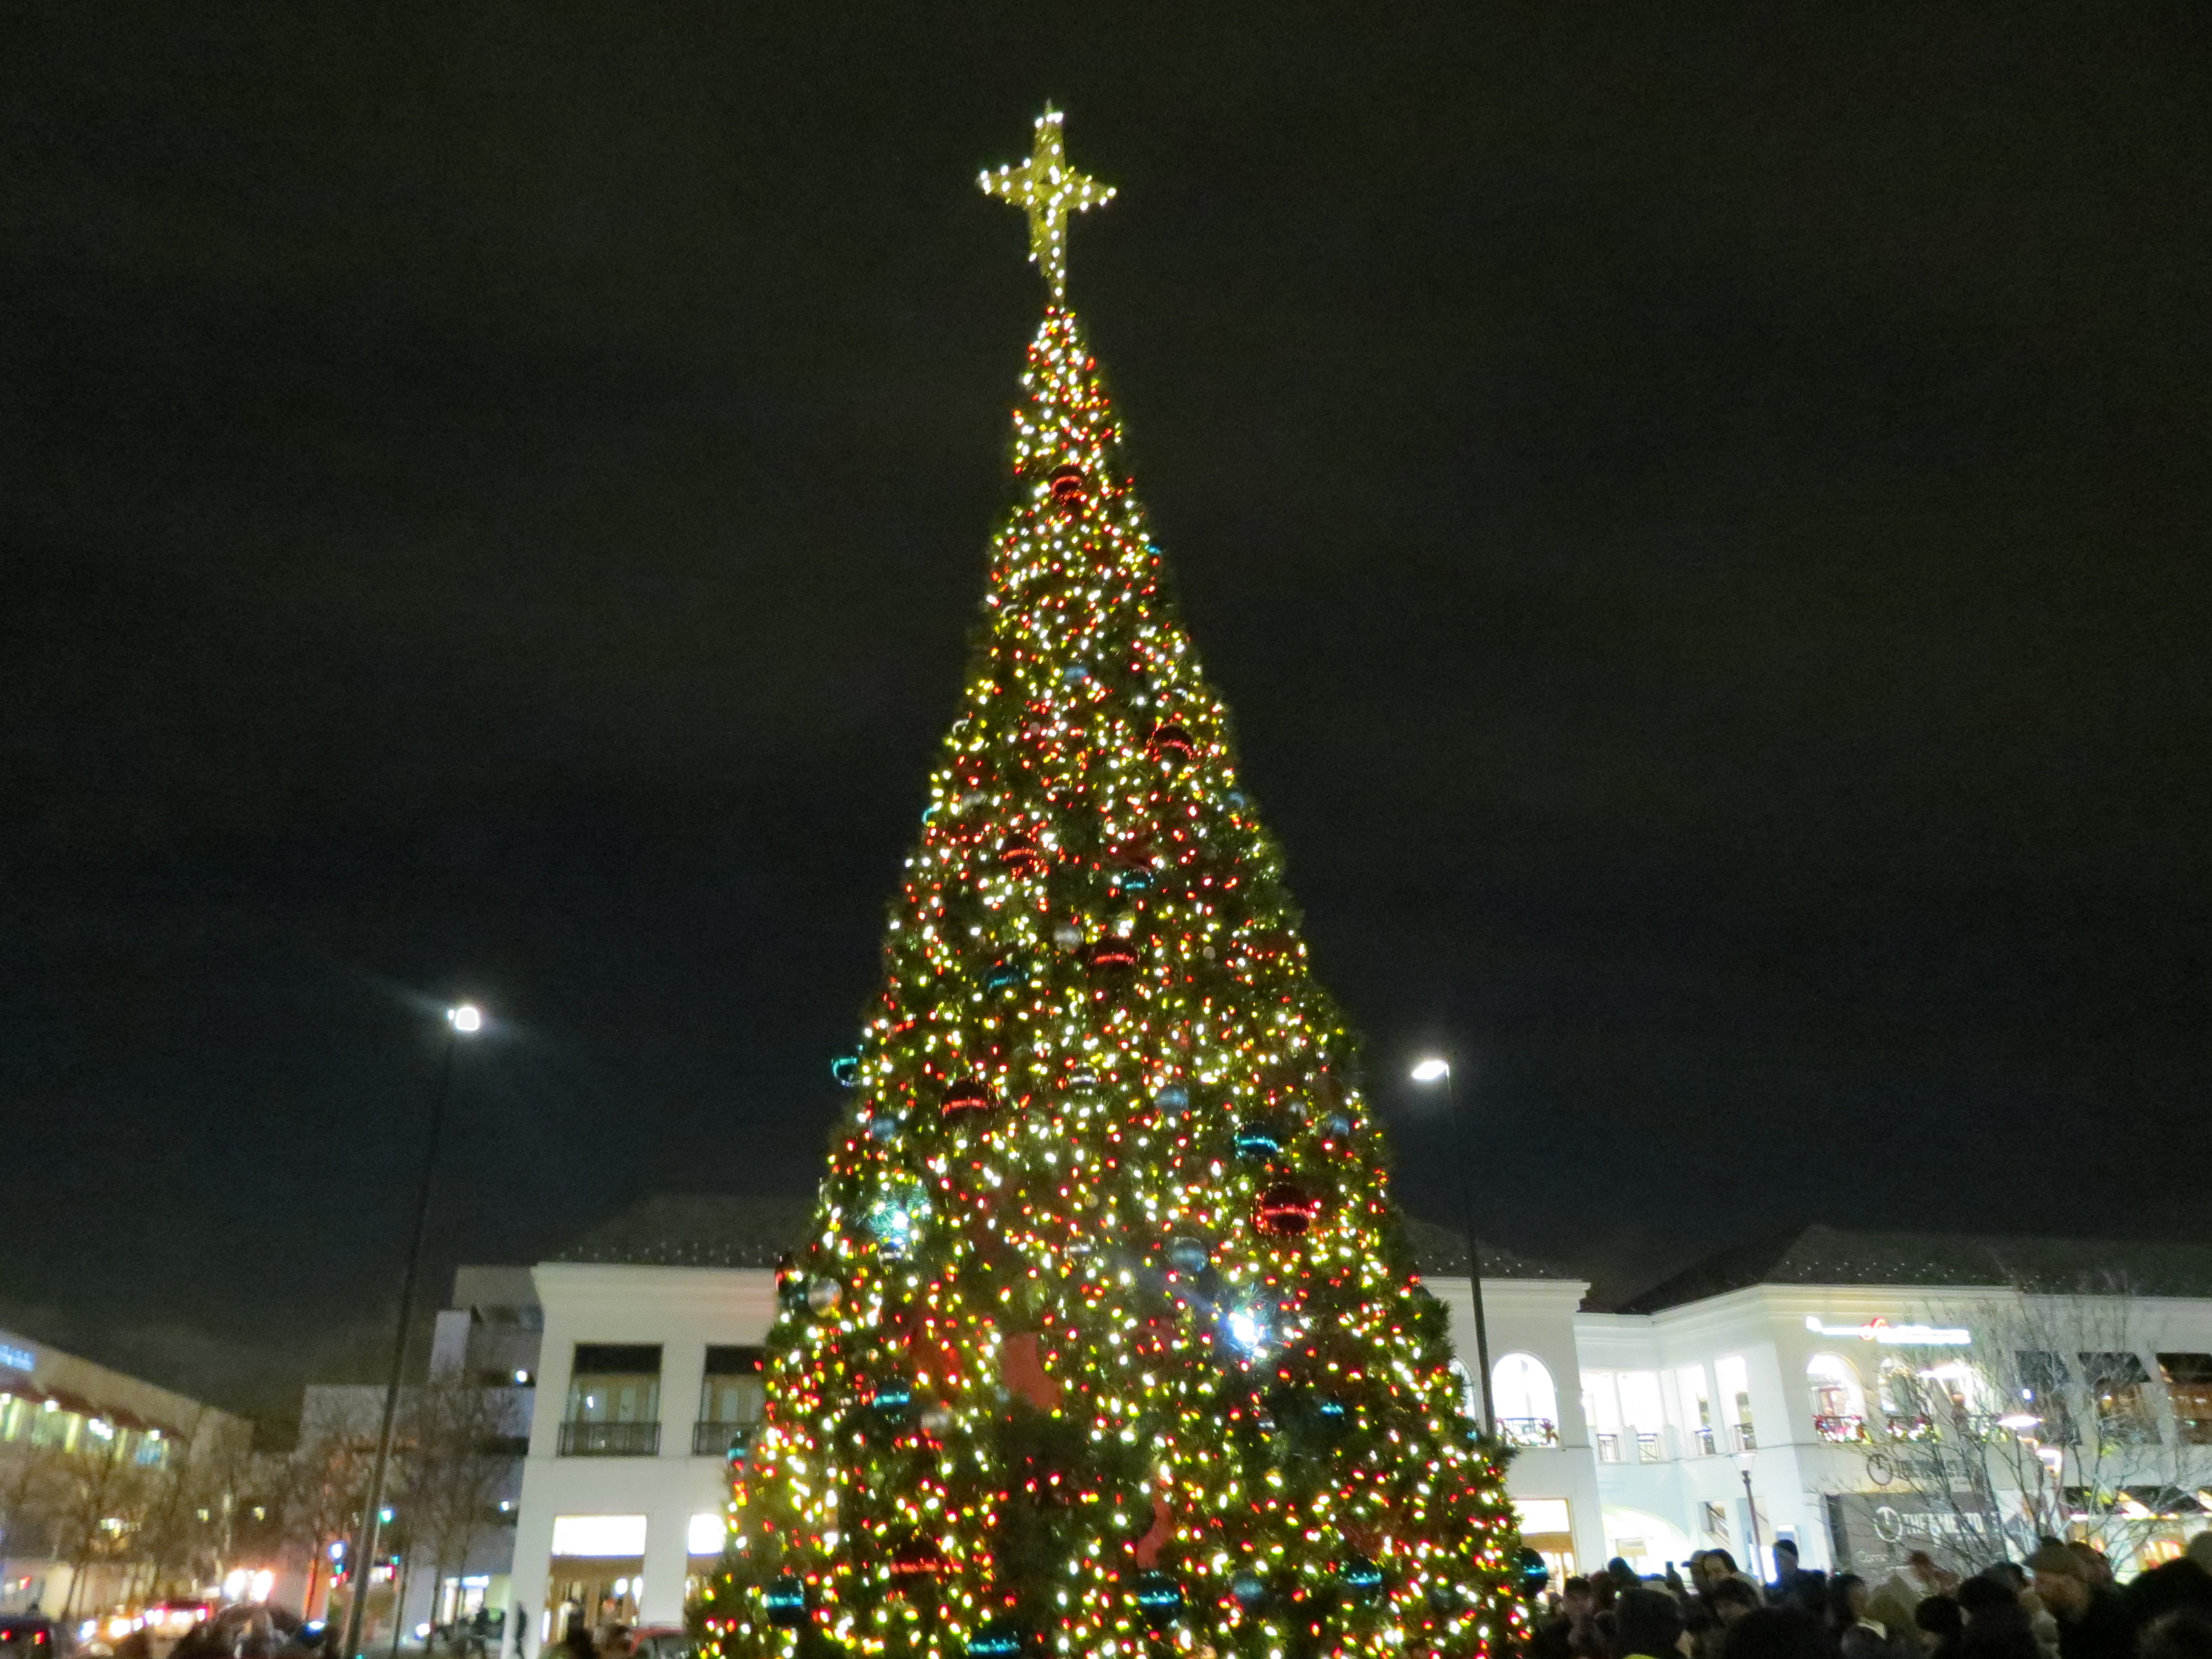 Families from throughout Queens gathered to watch as the Christmas tree in Atlas Park was lit Saturday evening.